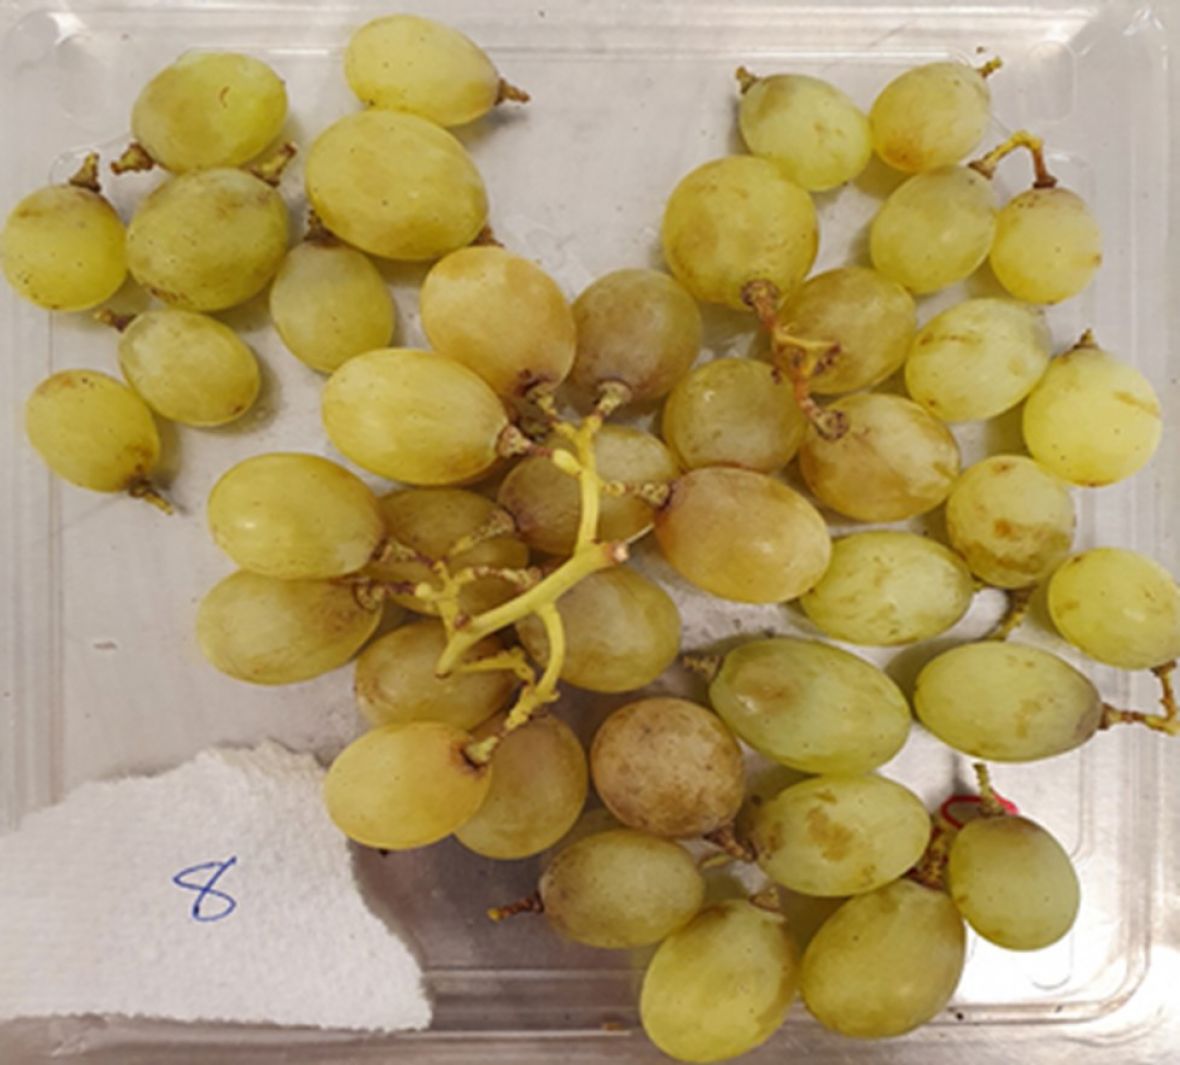 Low to moderate severity latent Botrytis rot among ‘Luisco’ grapes during cool storage.